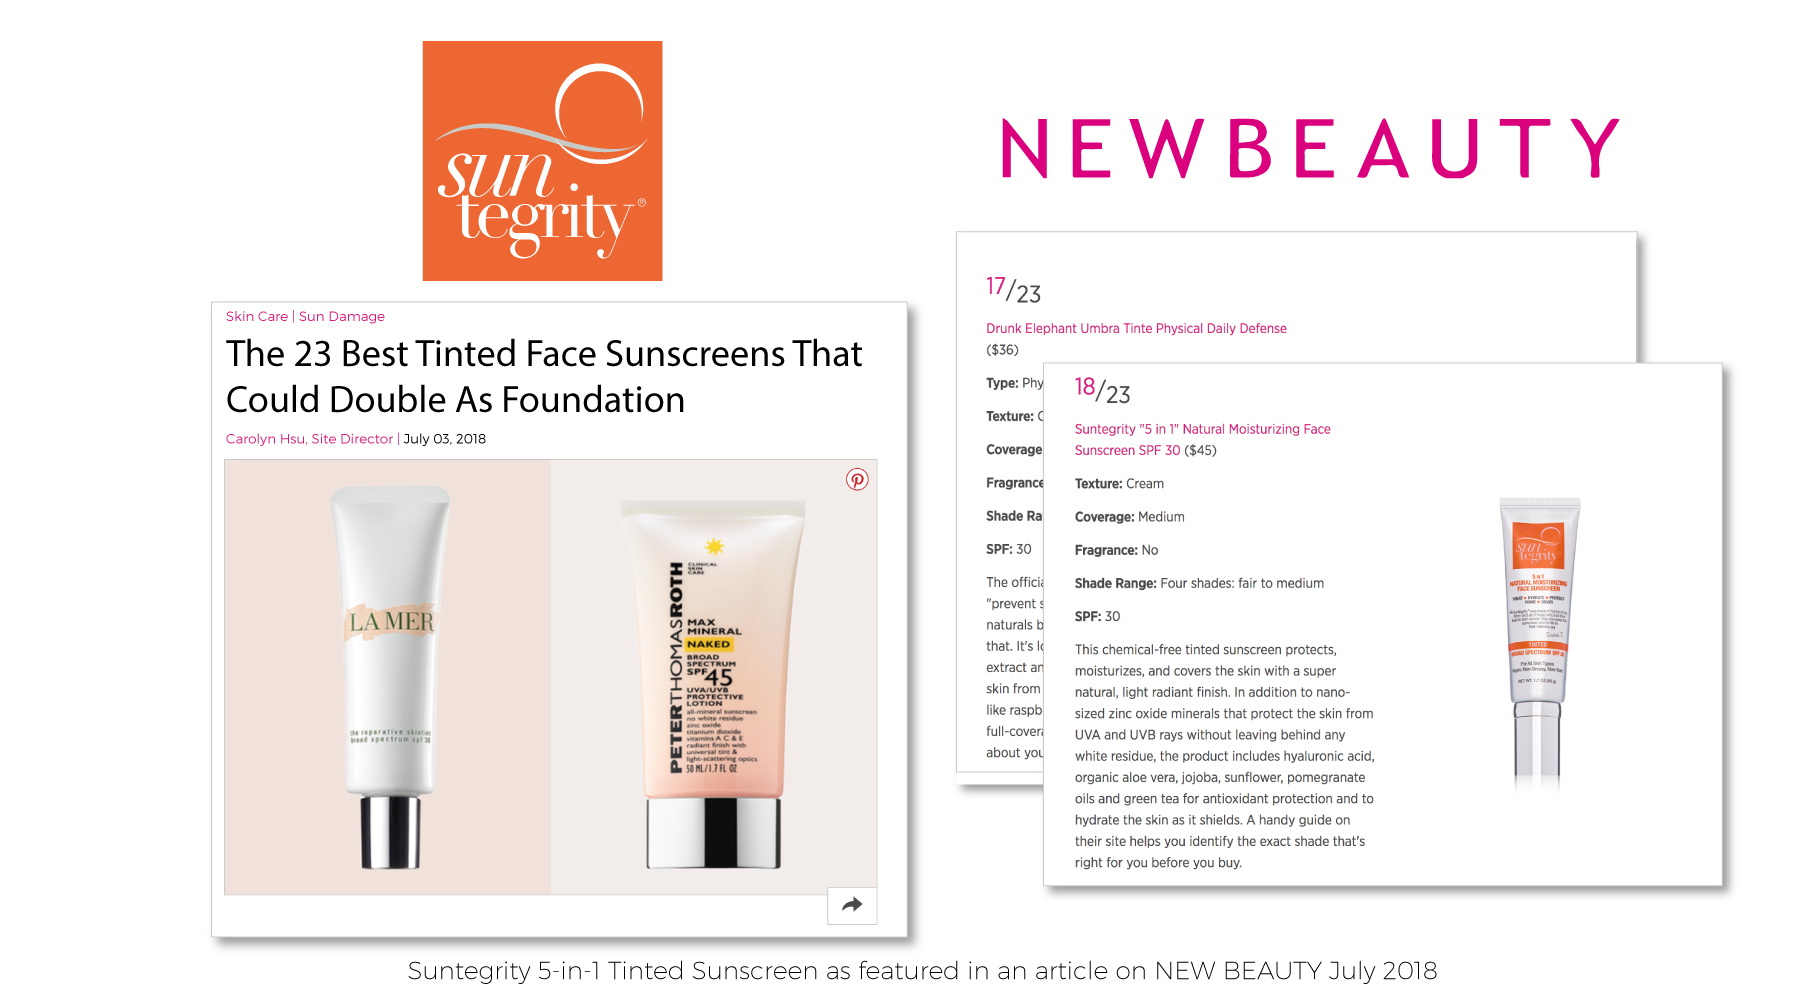 The 23 Best Tinted Face Sunscreen That Could Double As Foundation - Suntegrity Skincare